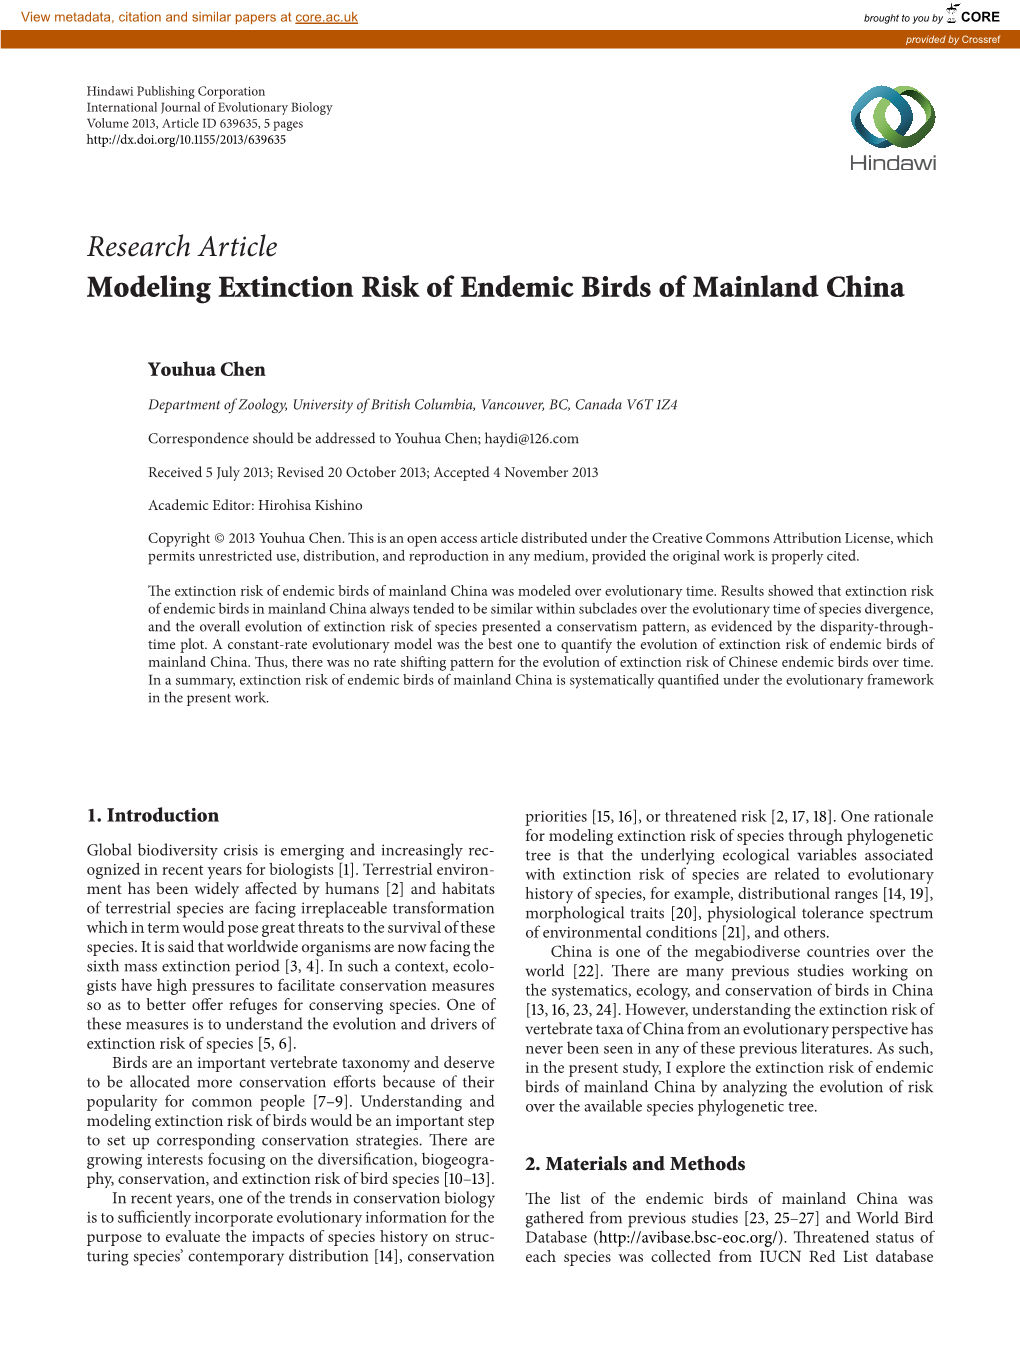 Research Article Modeling Extinction Risk of Endemic Birds of Mainland China